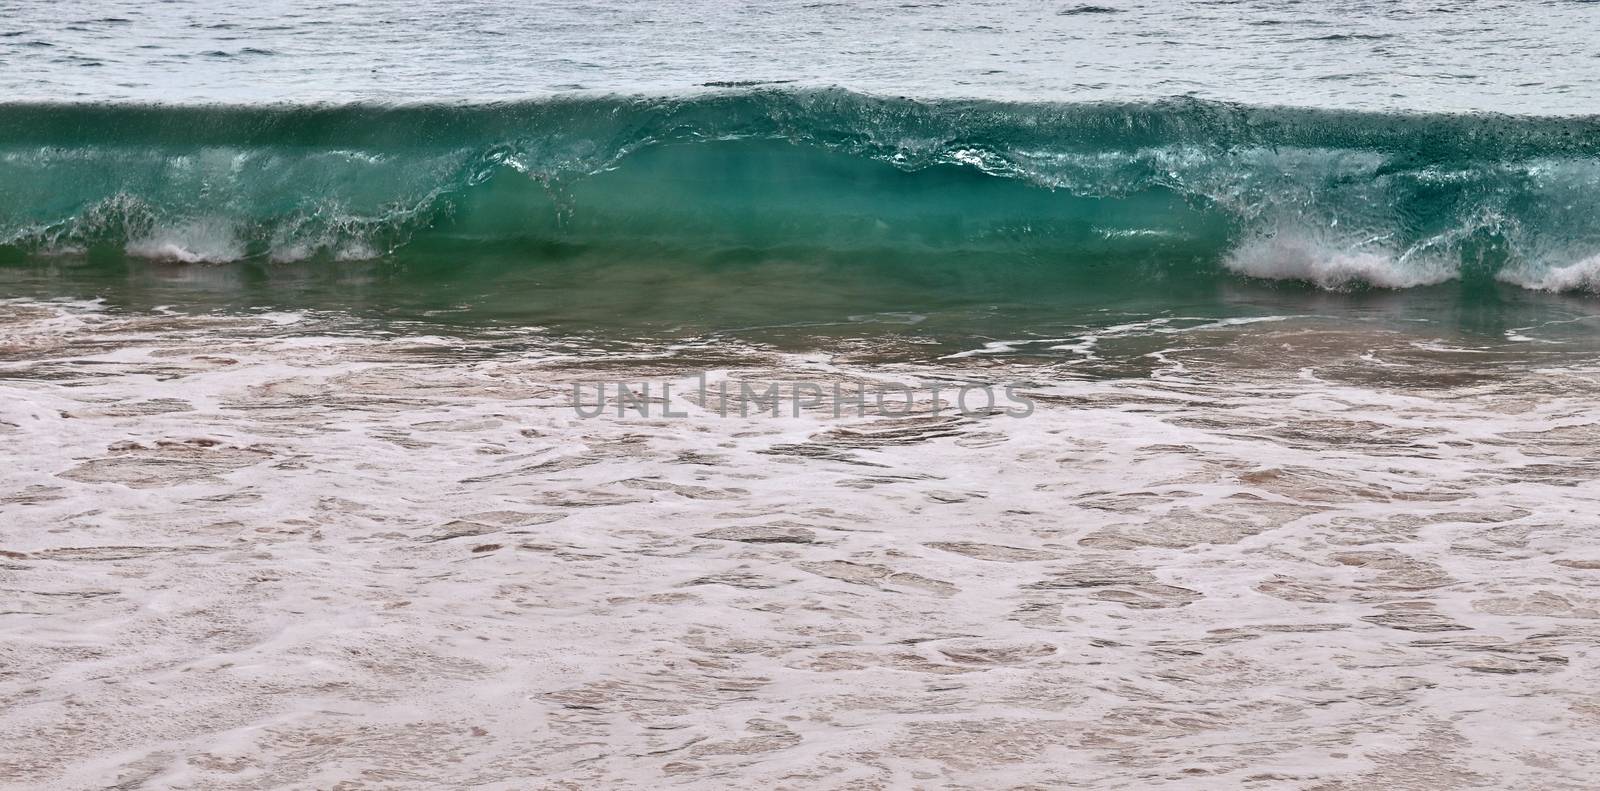 Stunning indian ocean waves at the beaches on the paradise islan by MP_foto71